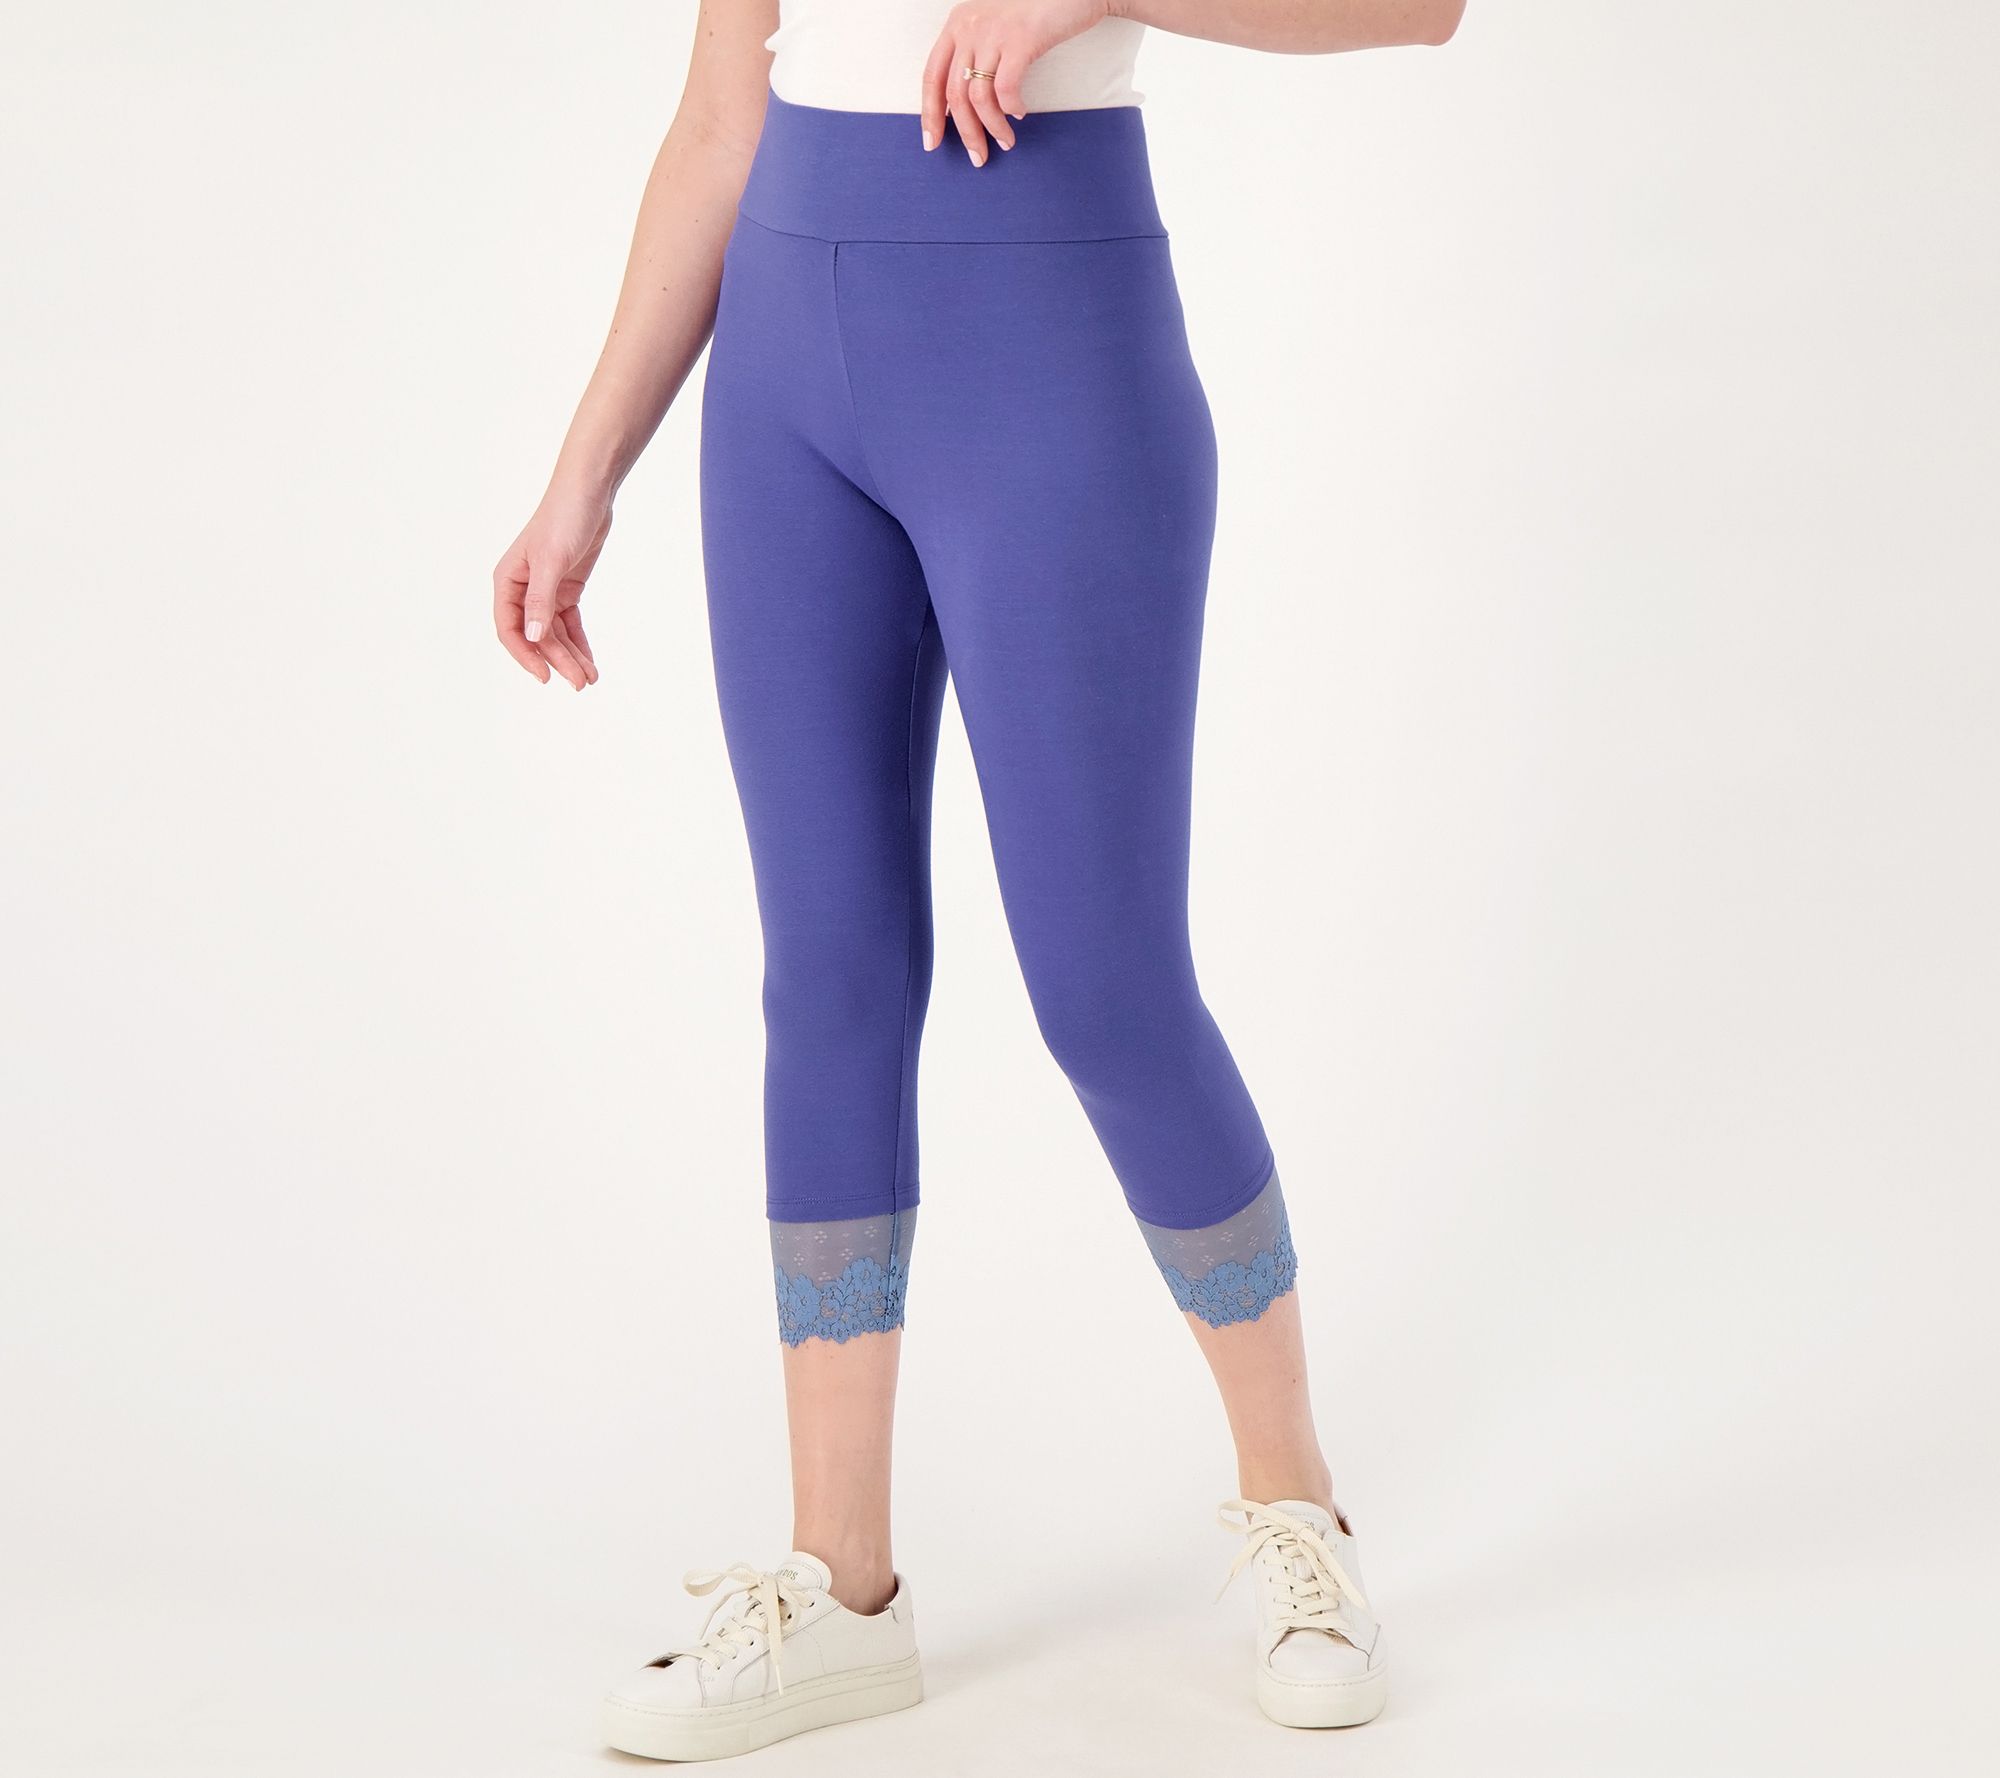 Buy Go Colors Women Solid Lilac Ankle Length Legging online